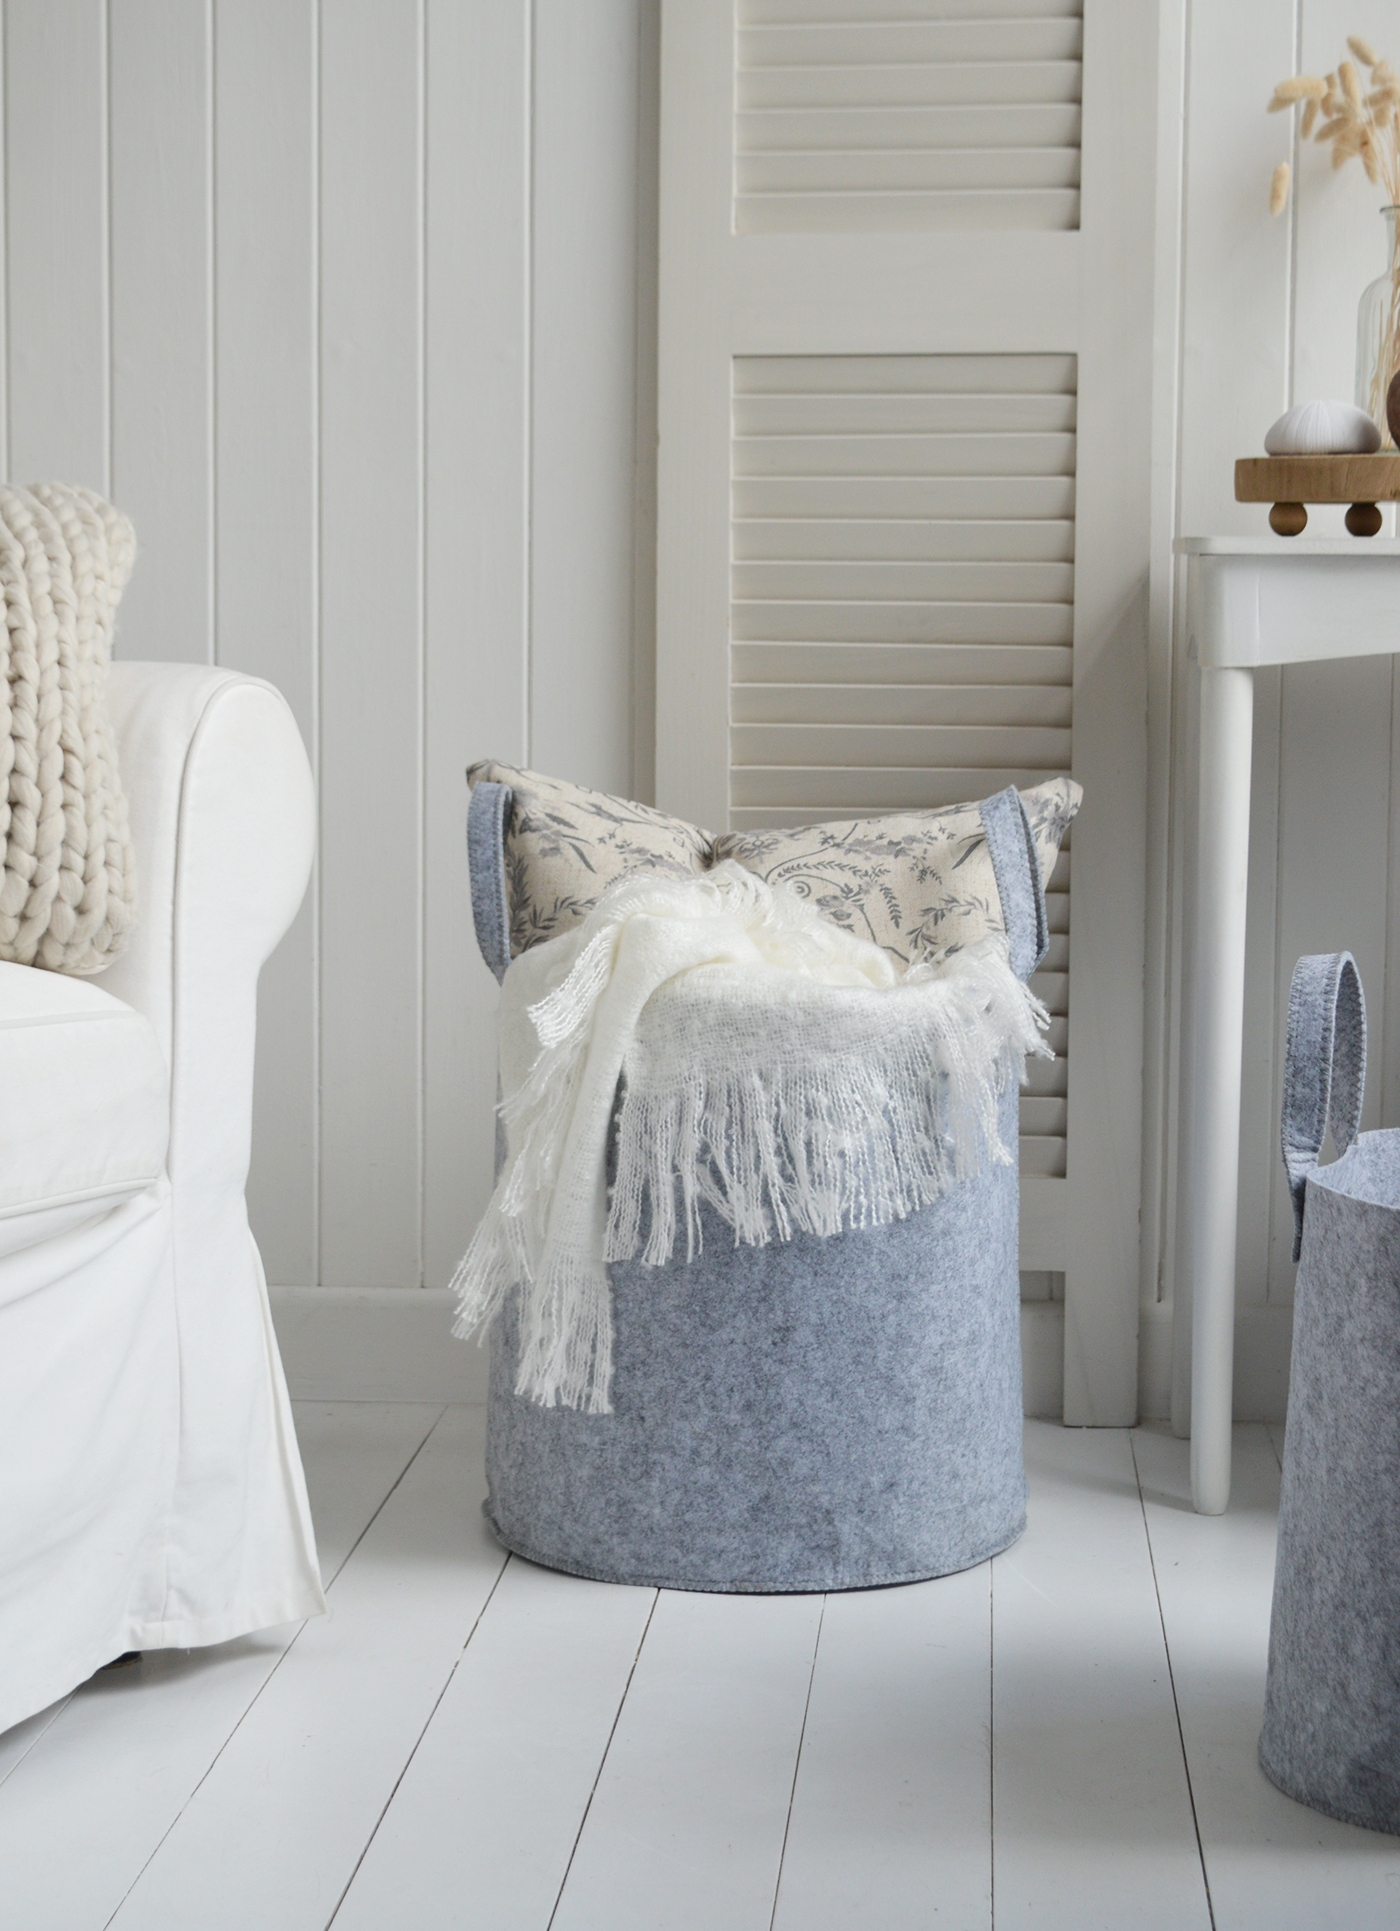 A close up of the Kittery largest basket filled woith throws and cushions, perfect for storge and to style modern farmhouse, country and coastal homes and interiors